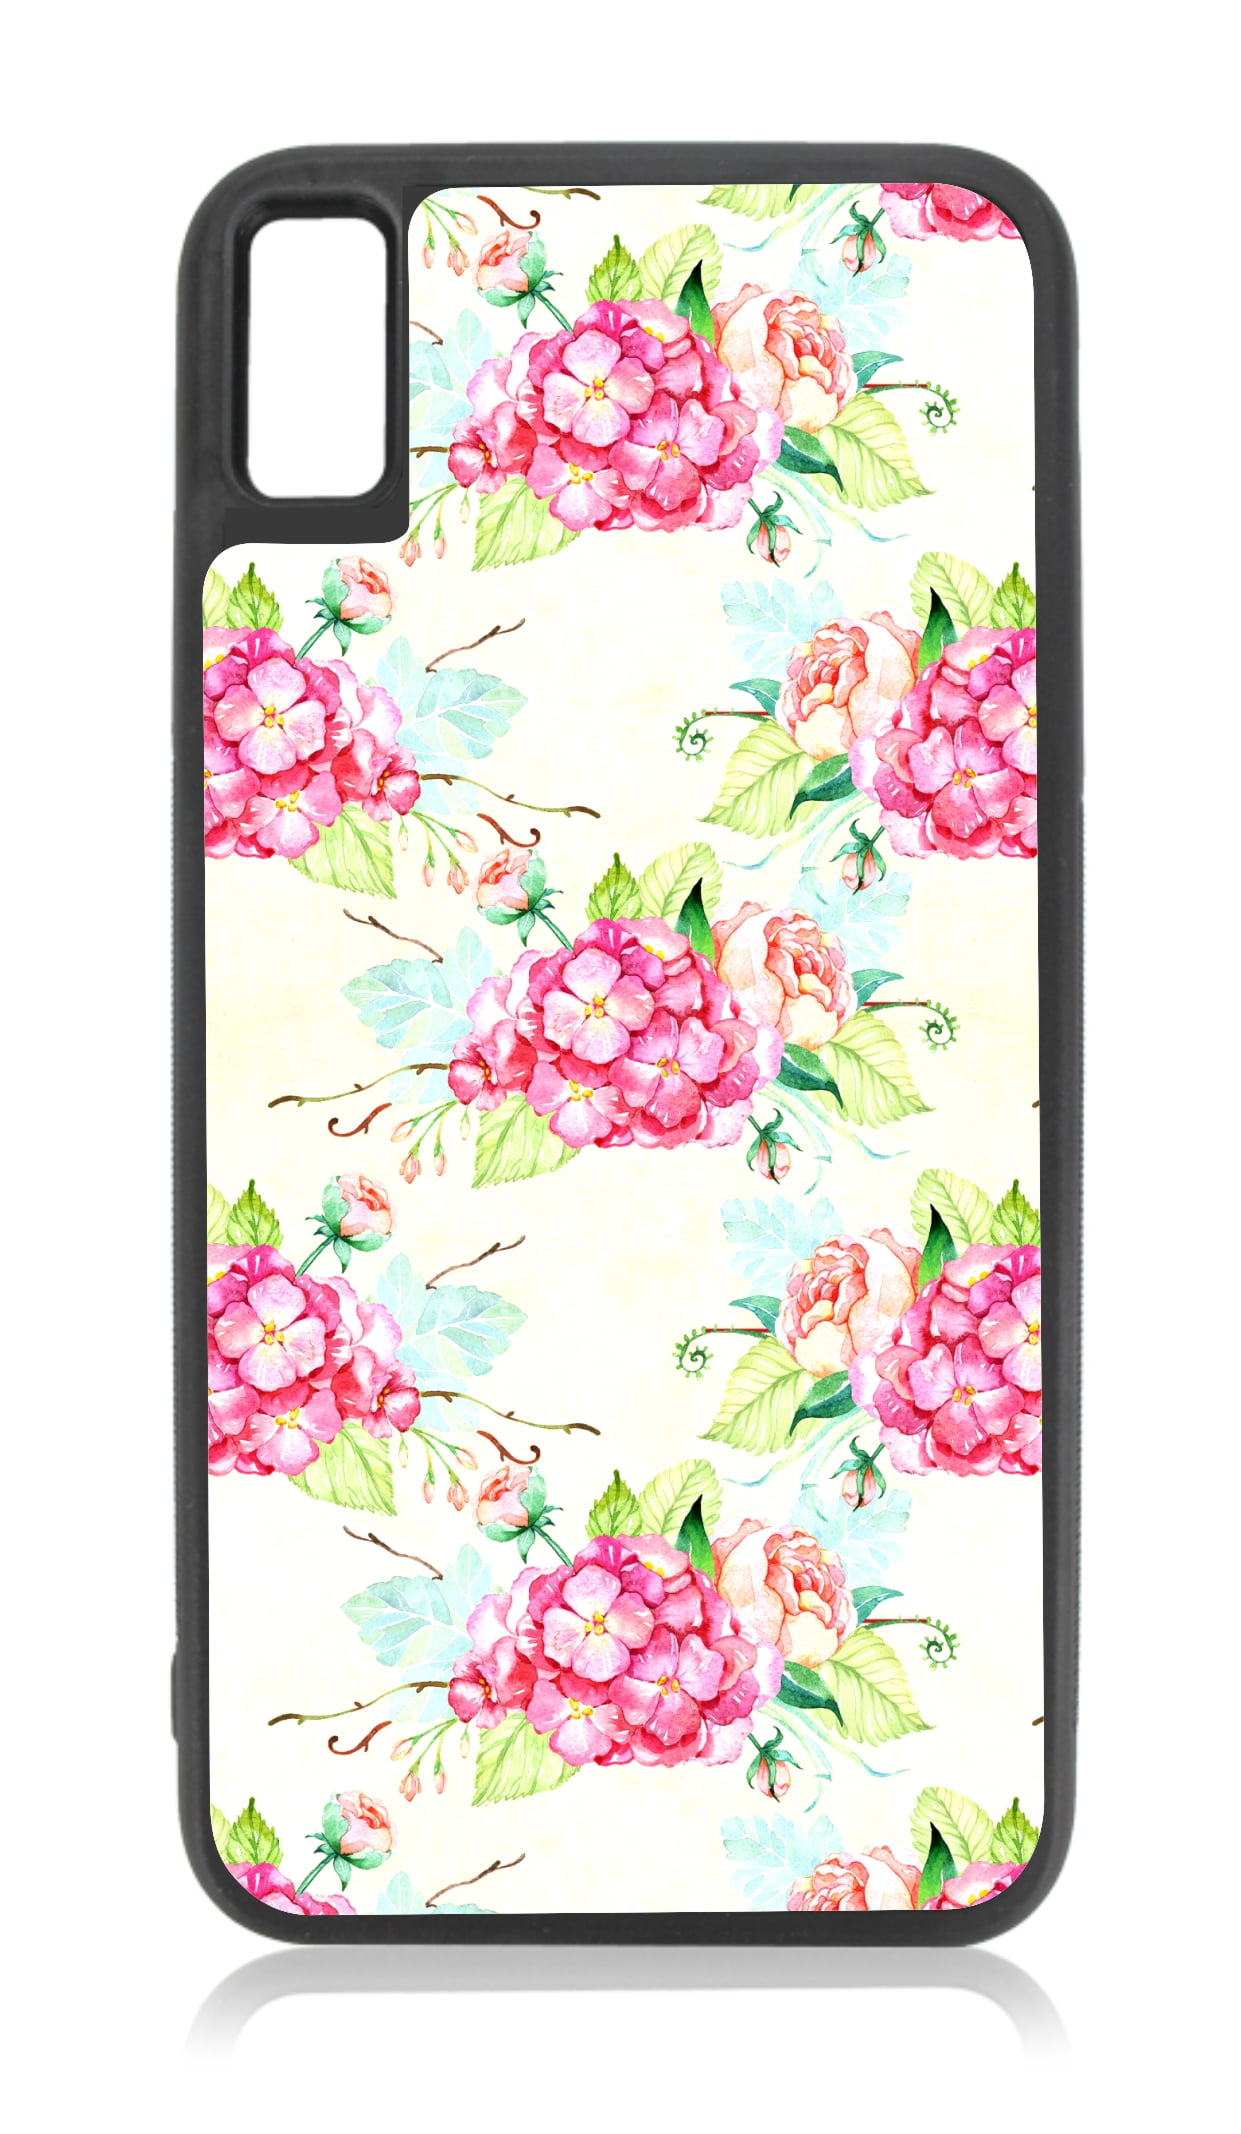 Download Watercolor Floral Pink And Peach Rose Bouquet Flowers And Leaves Design Flower Leaf Pattern Print Compatible With Iphone 12 Pro Max Case Black Walmart Com Walmart Com